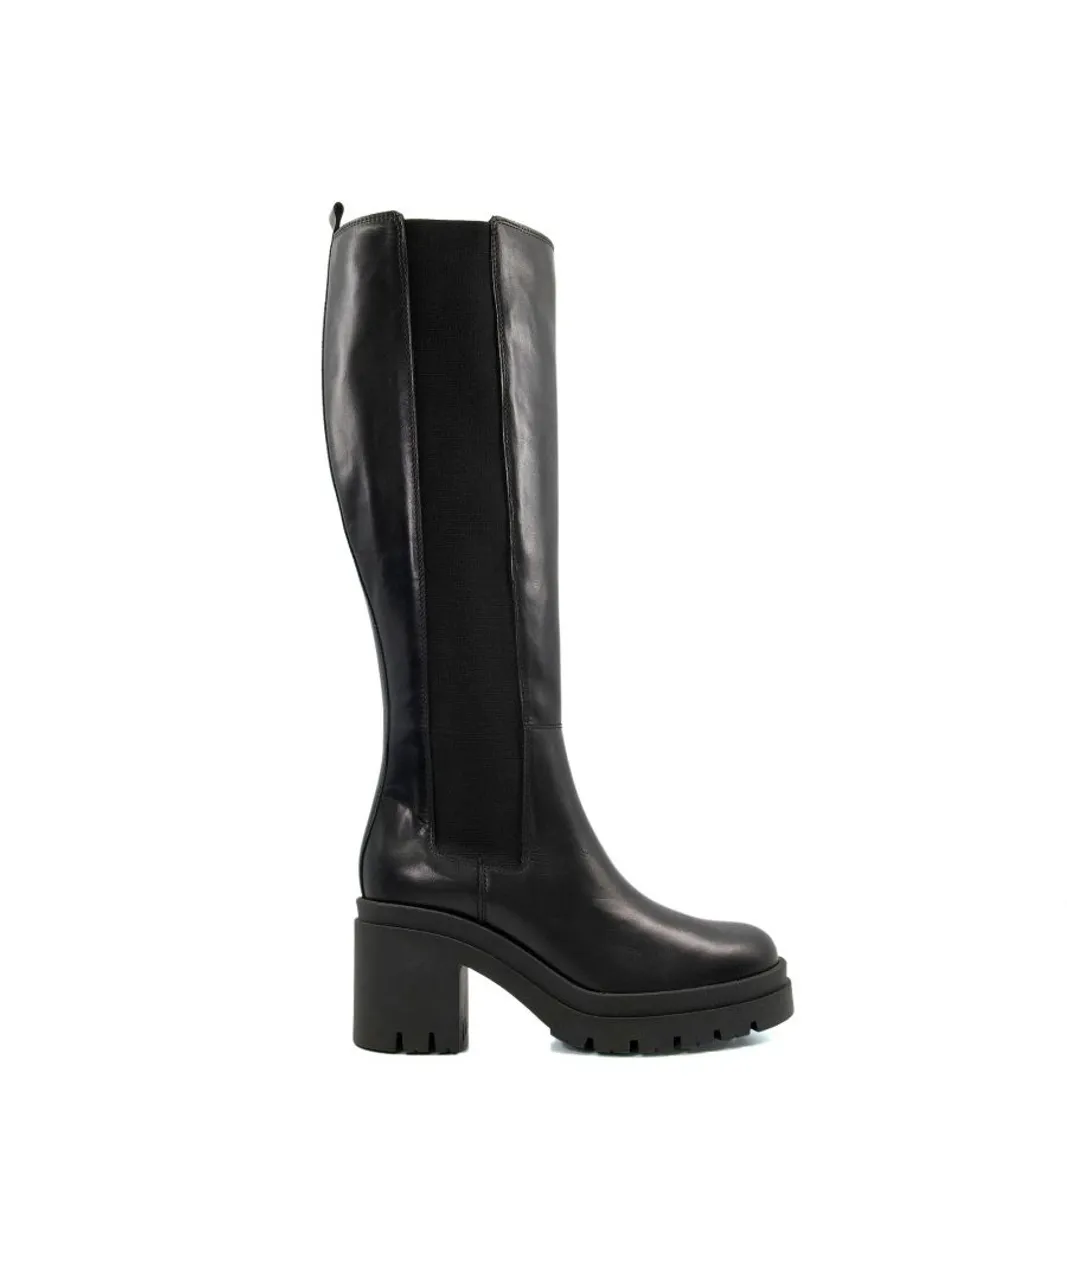 Dune London Womens Ladies Time - Leather Block Heel Knee-High Boots - Black Leather (archived)